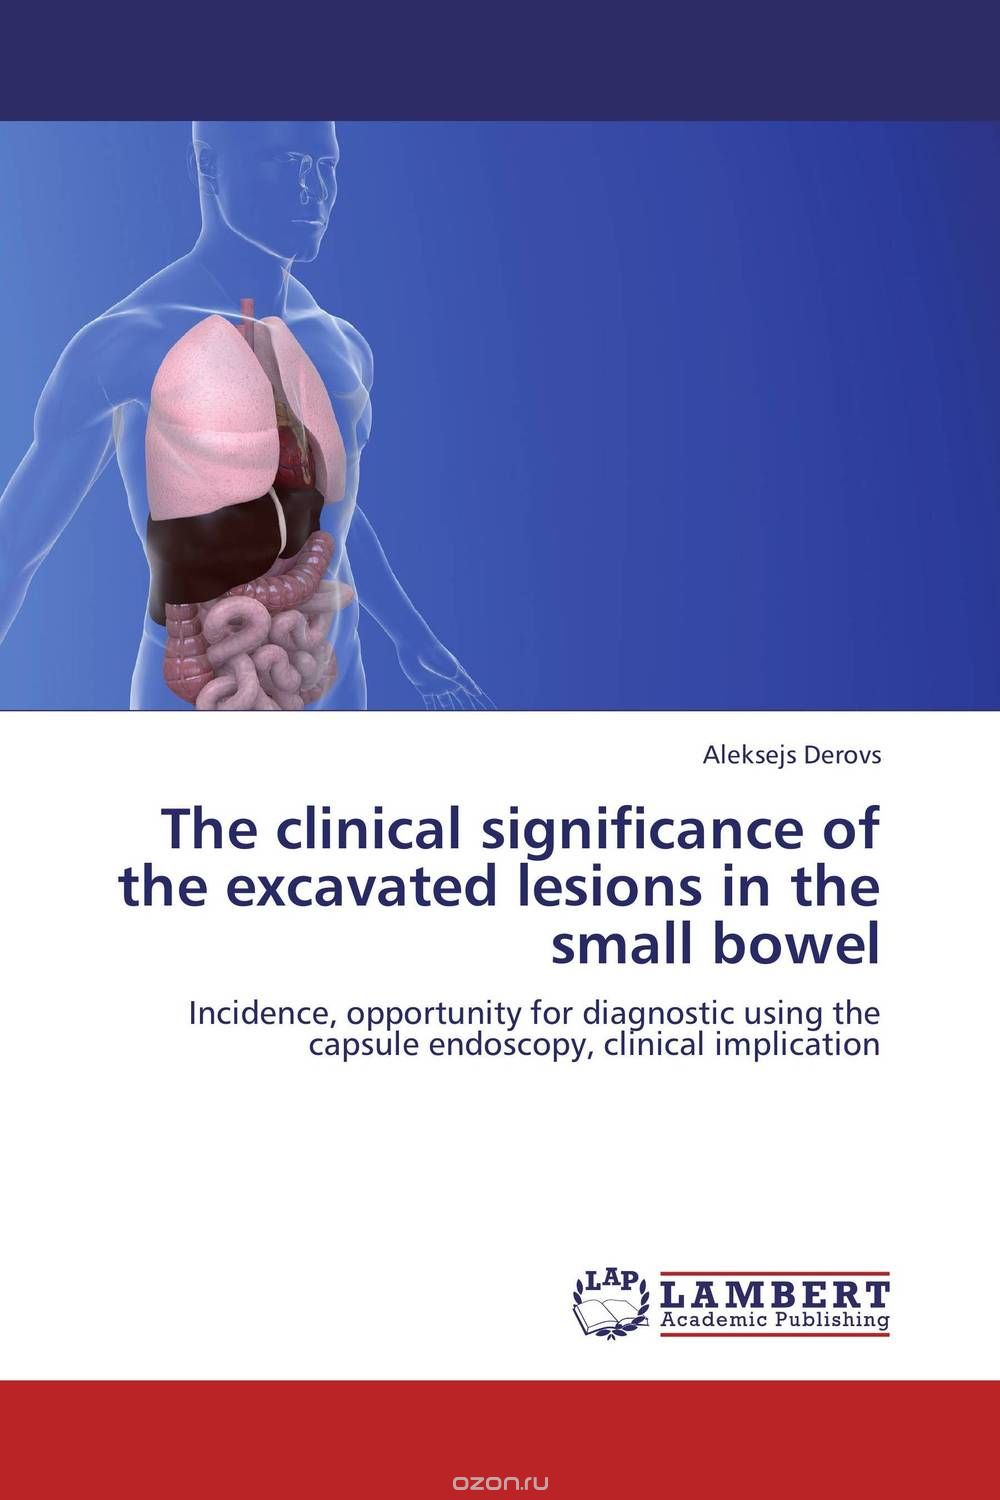 The clinical significance of the excavated lesions  in the small bowel